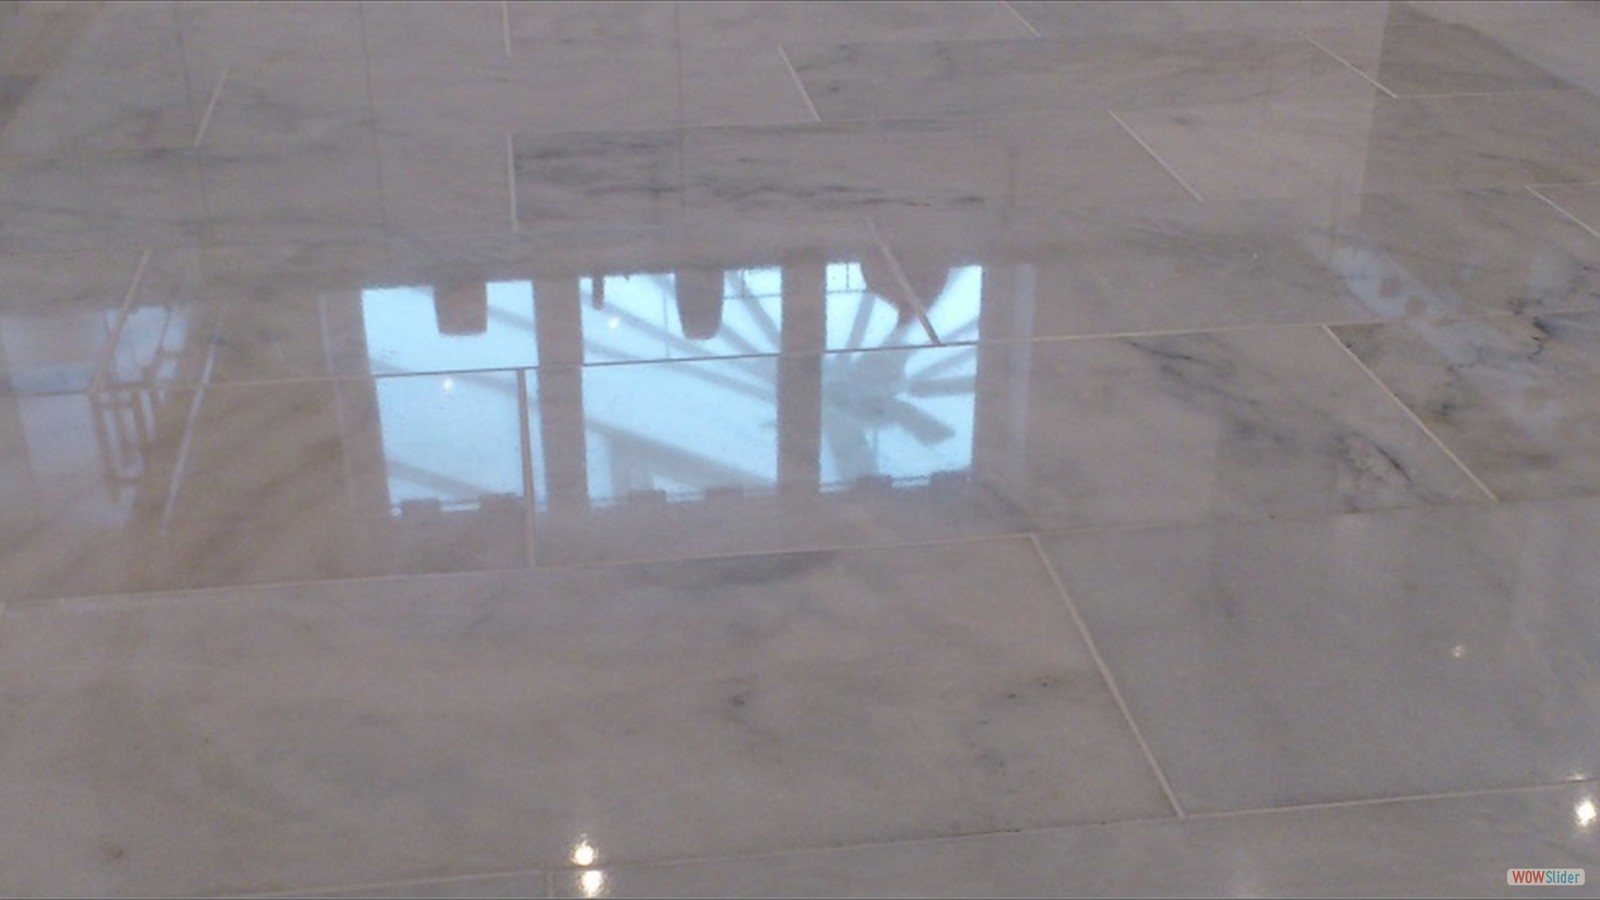 Marble Cleaning & Polishing